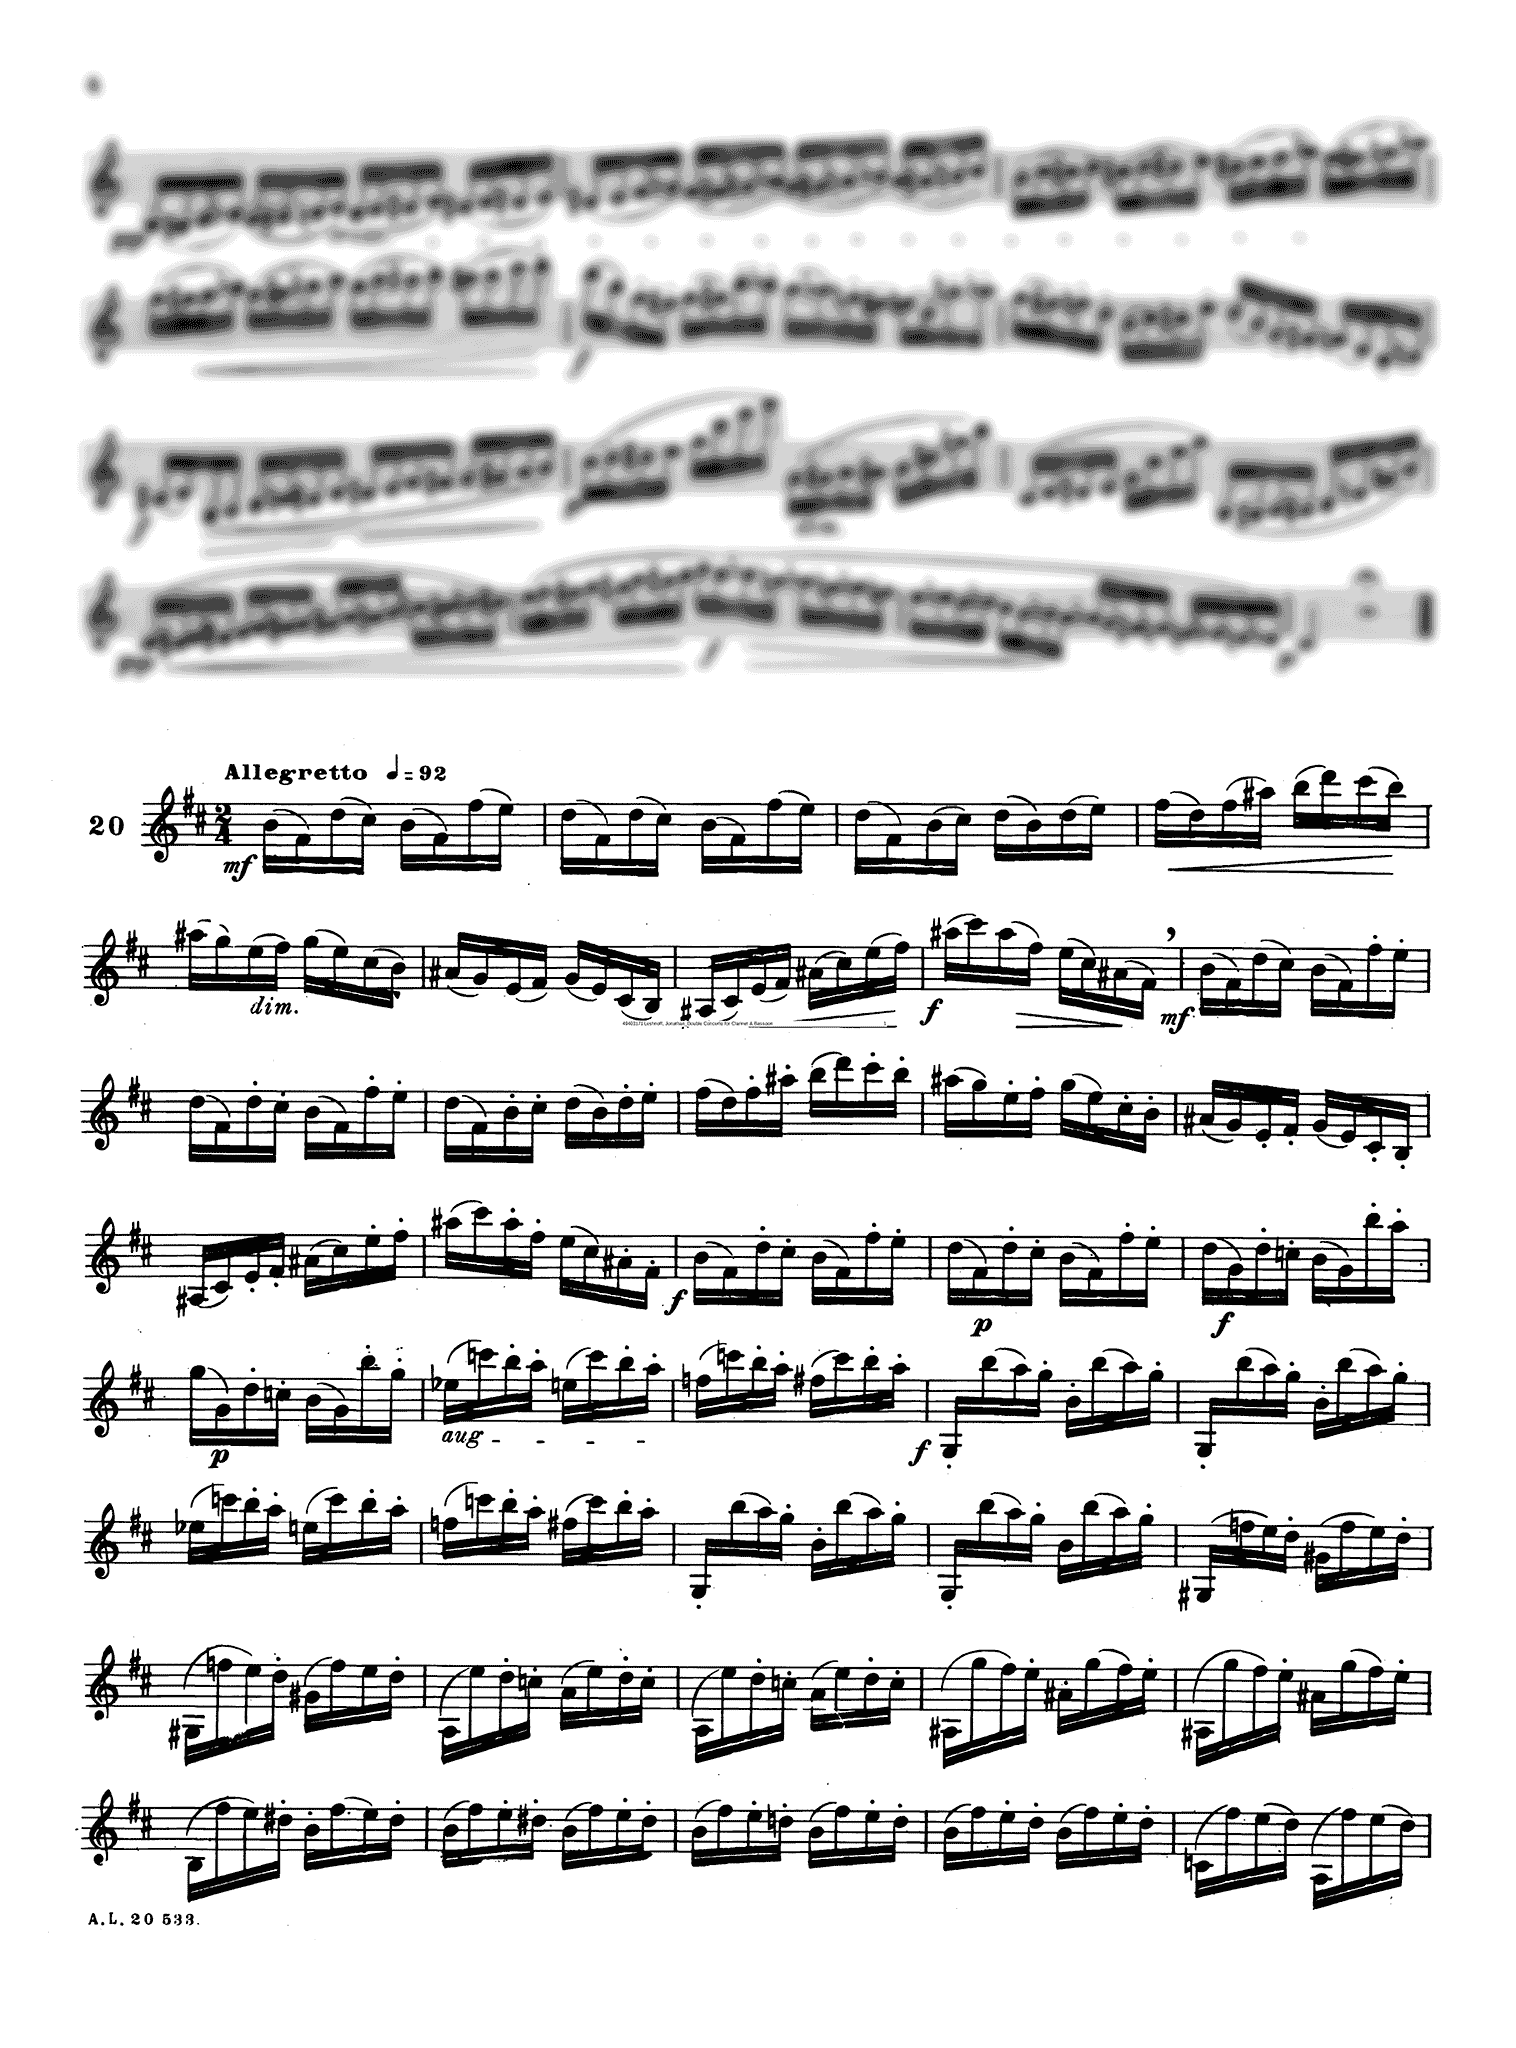 Cavallini 30 Caprices for Clarinet Book 2 Page 4